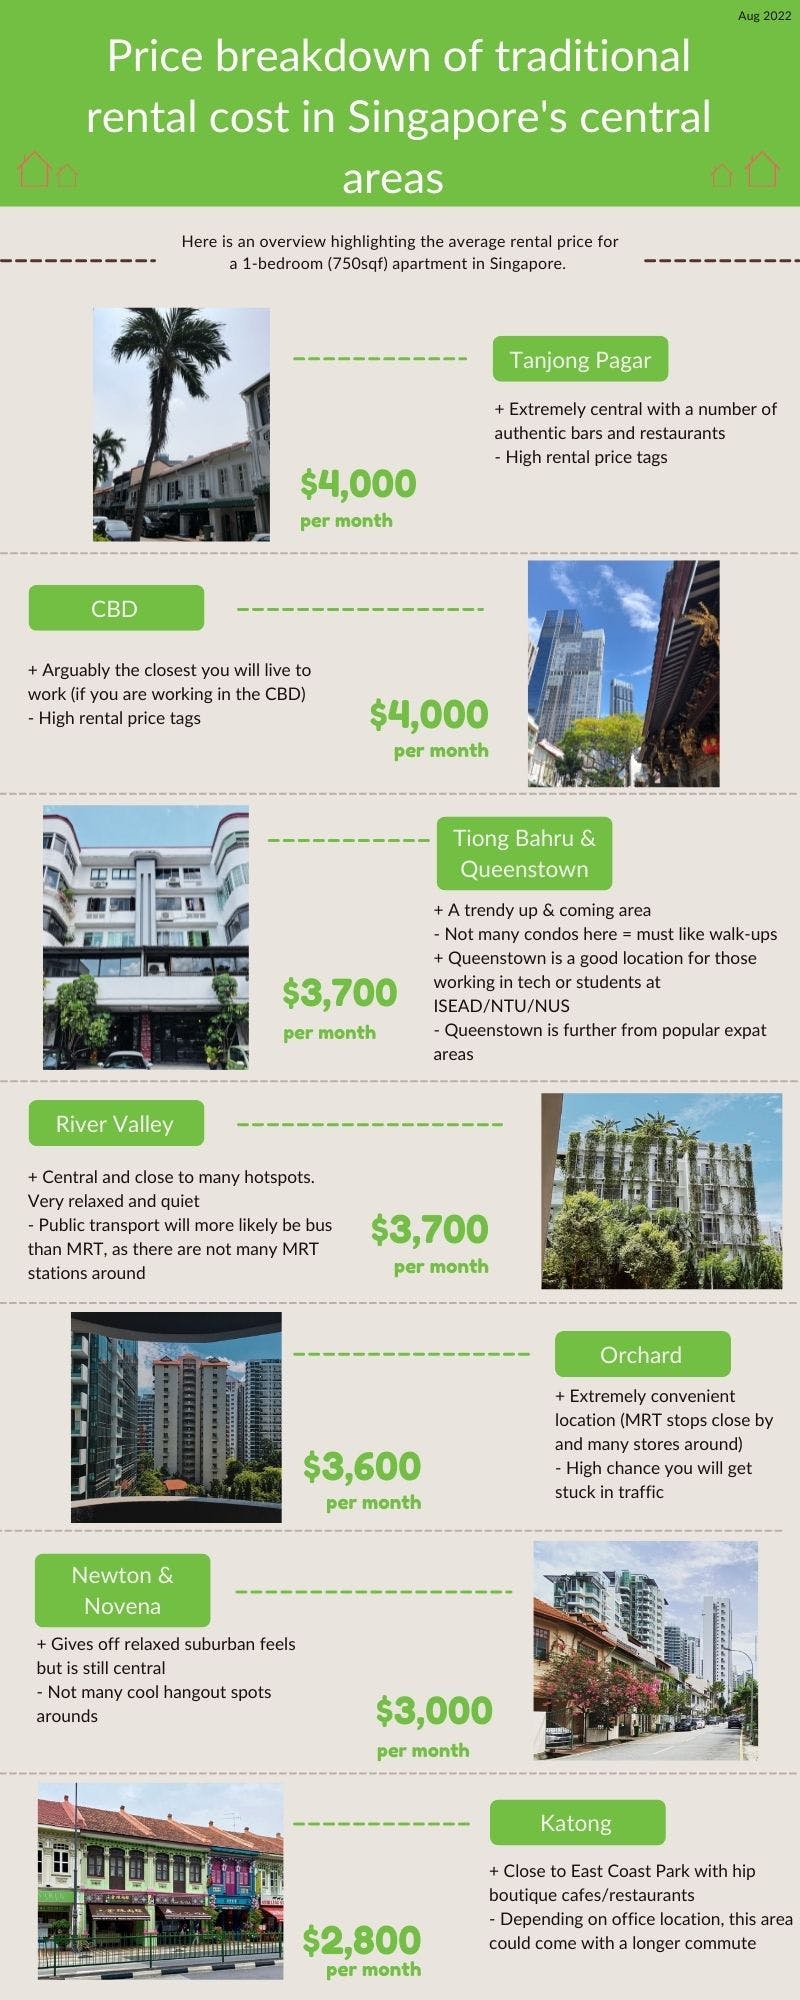 1 bedroom rental cost in Singapores central areas